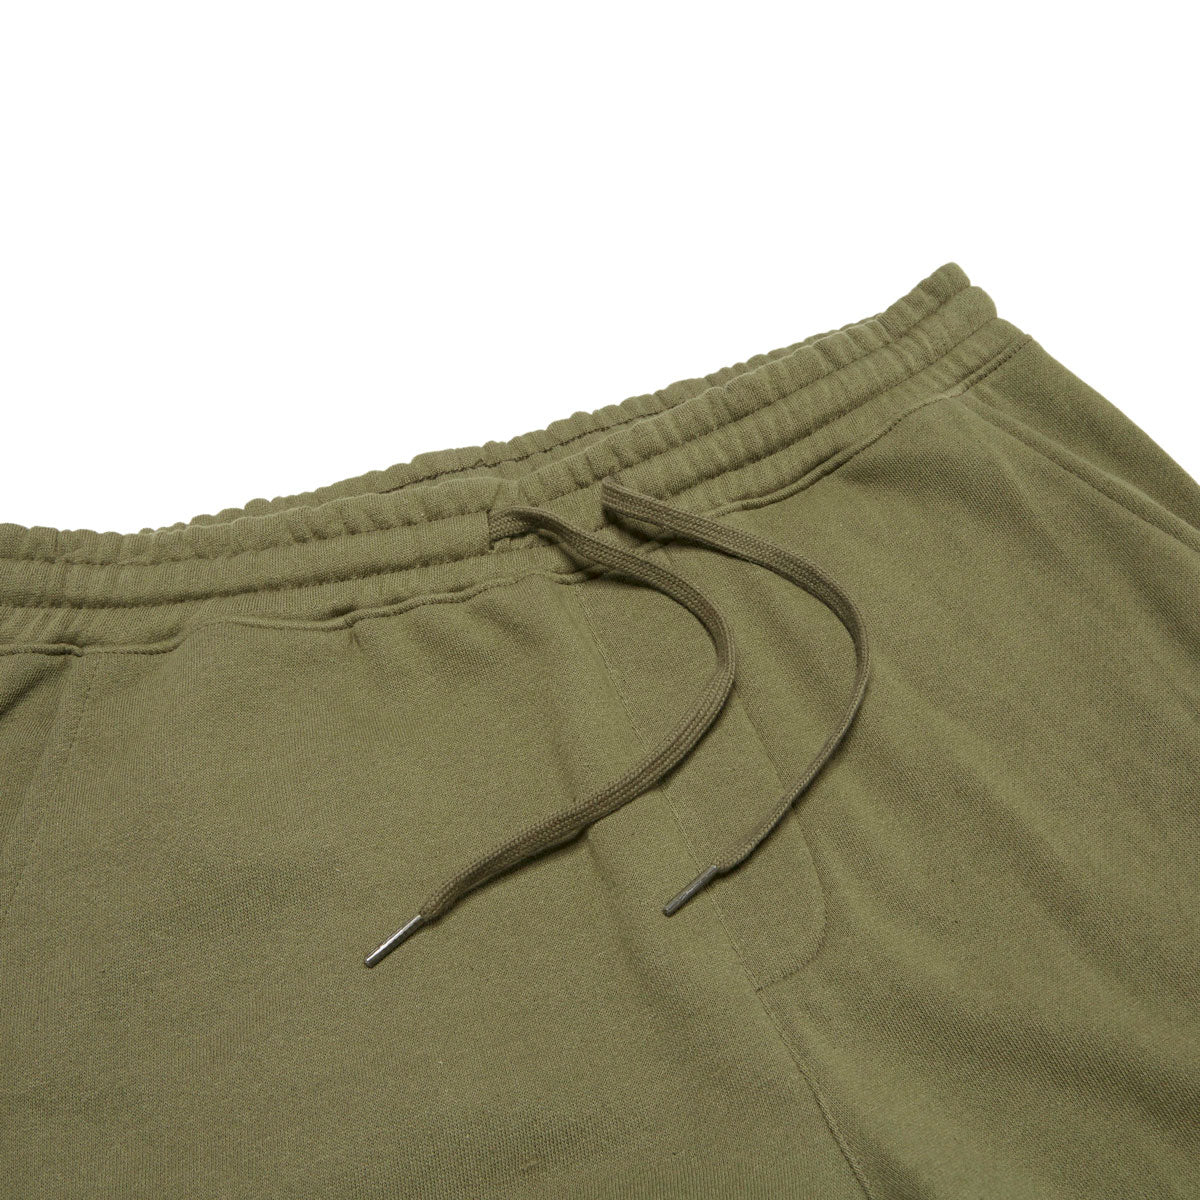 CCS Logo Rubber Patch Sweat Pants - Army Green image 3